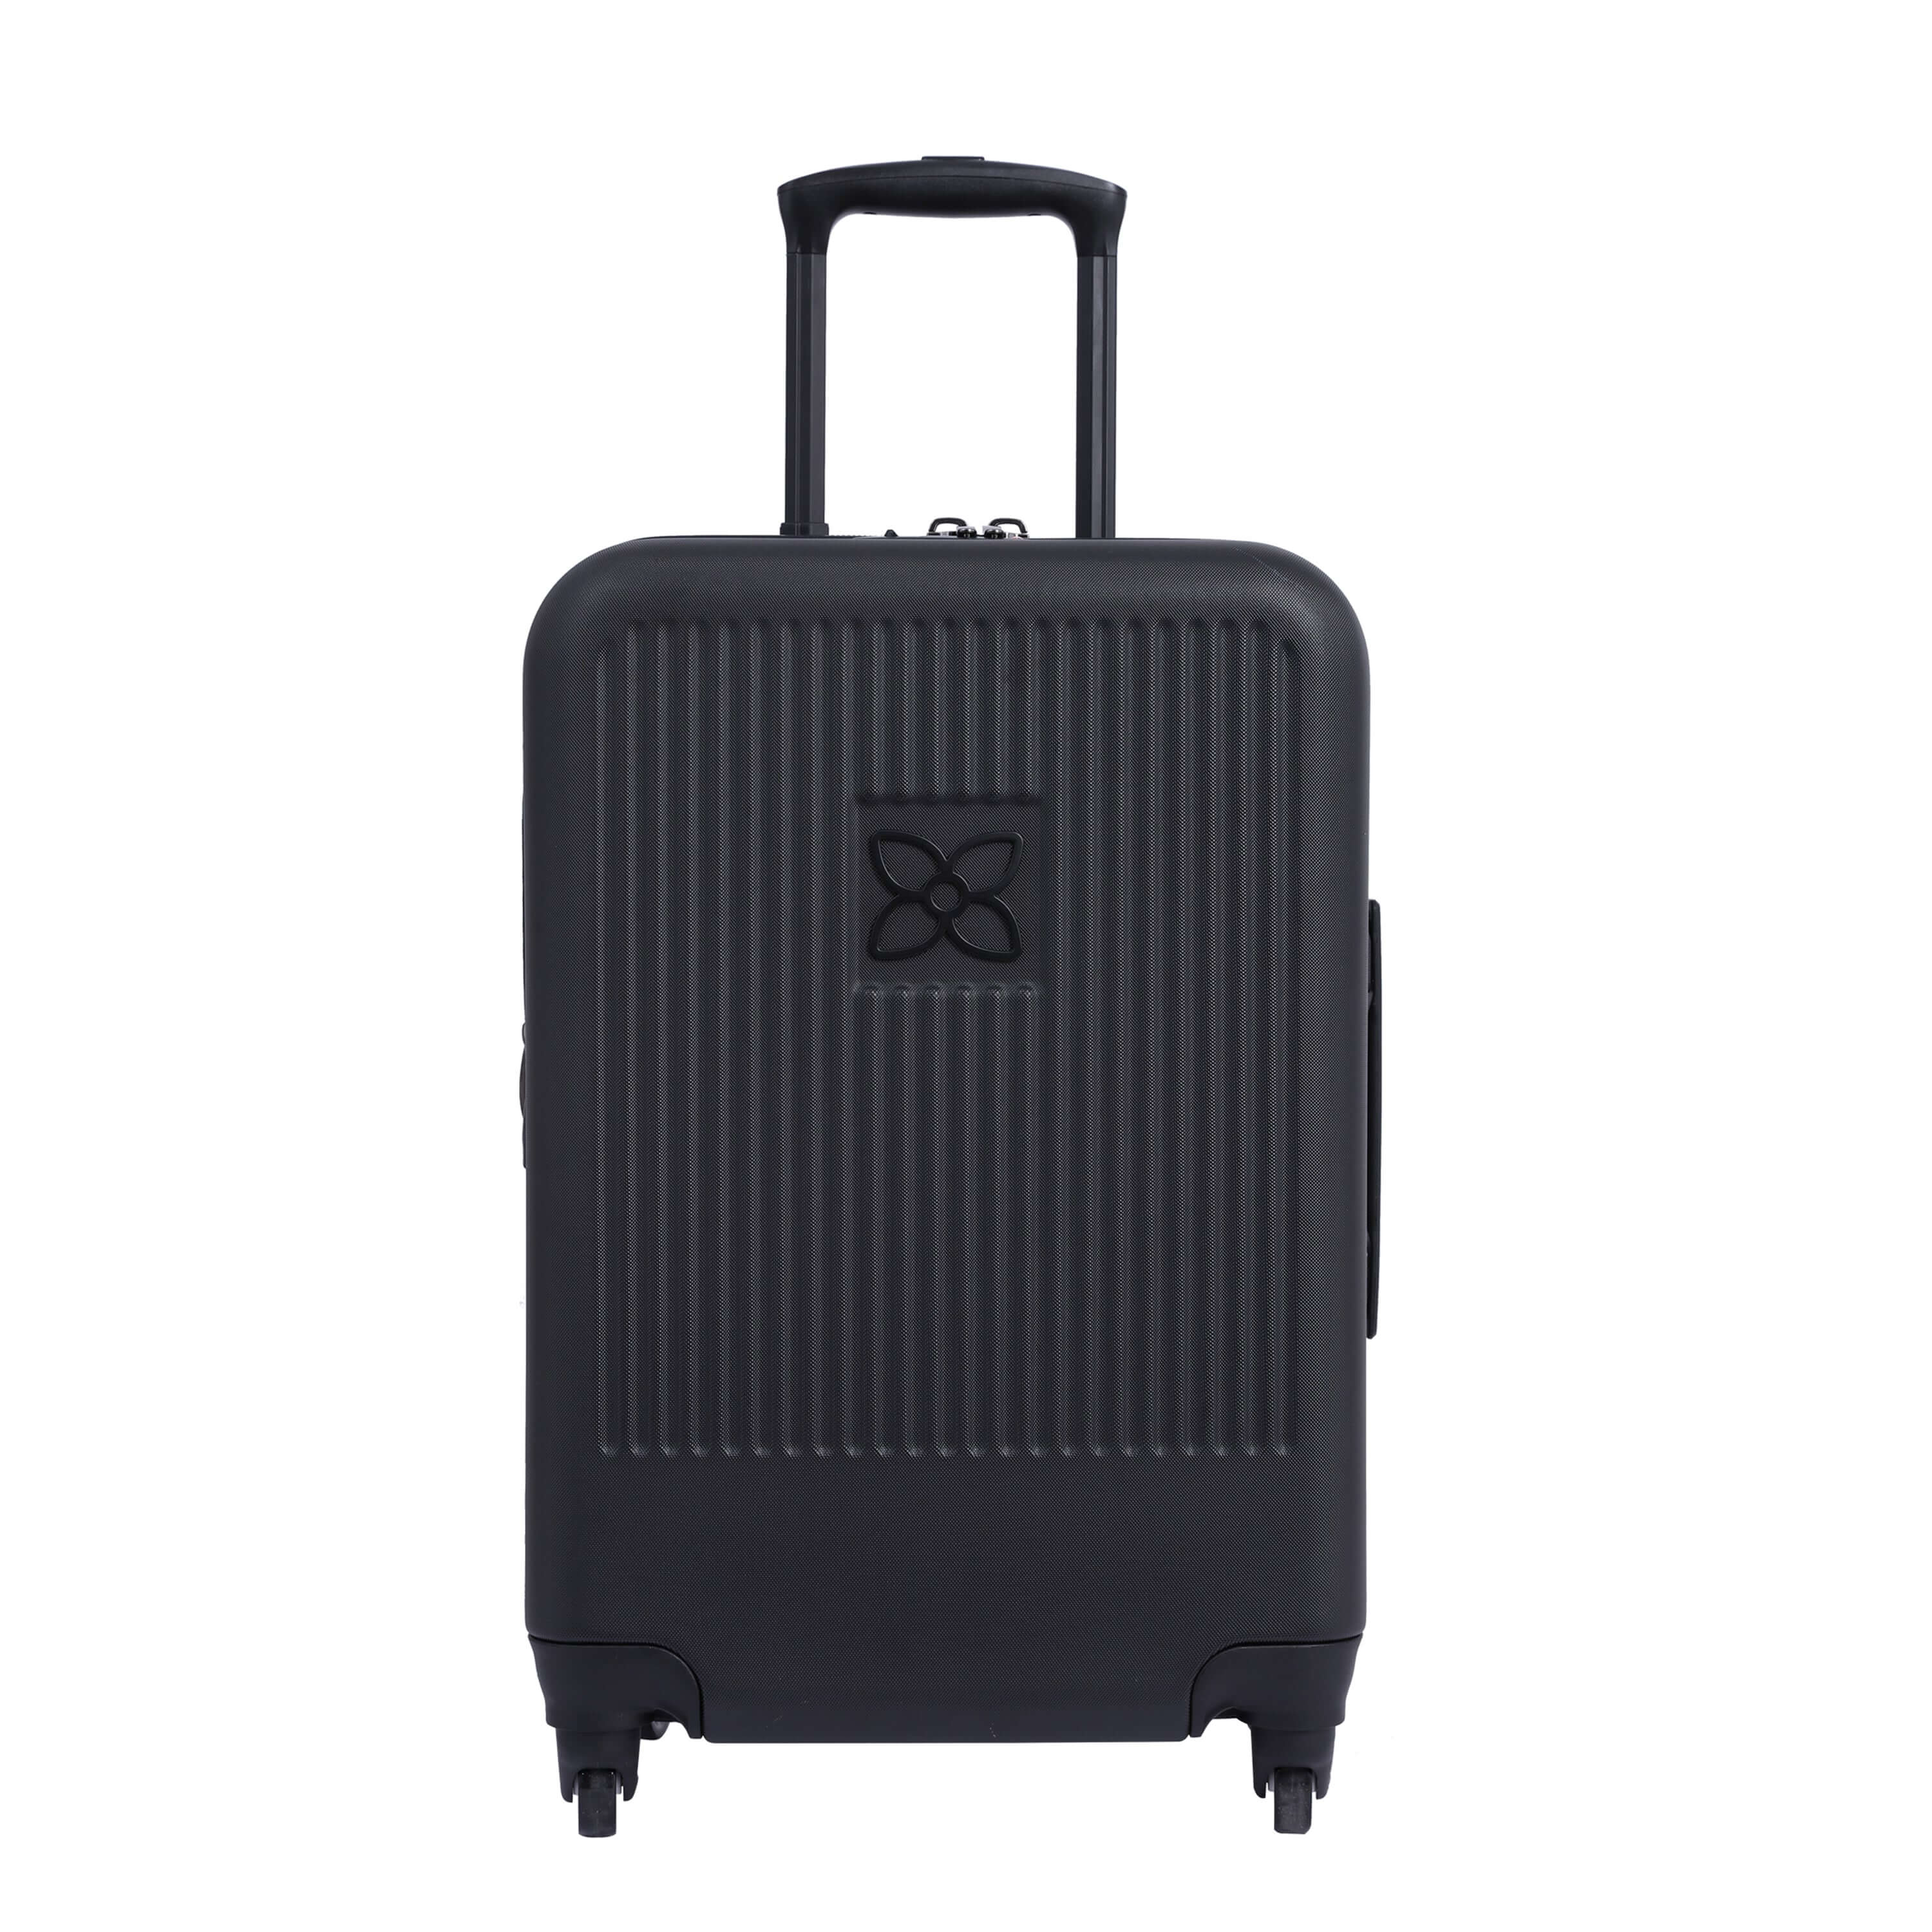 Flat front view of Sherpani hard-shell carry-on luggage, the Meridian in Black. Meridian features include a retractable luggage handle, uncrushable exterior, TSA-approved locking zippers and four 36-degree spinner wheels. 